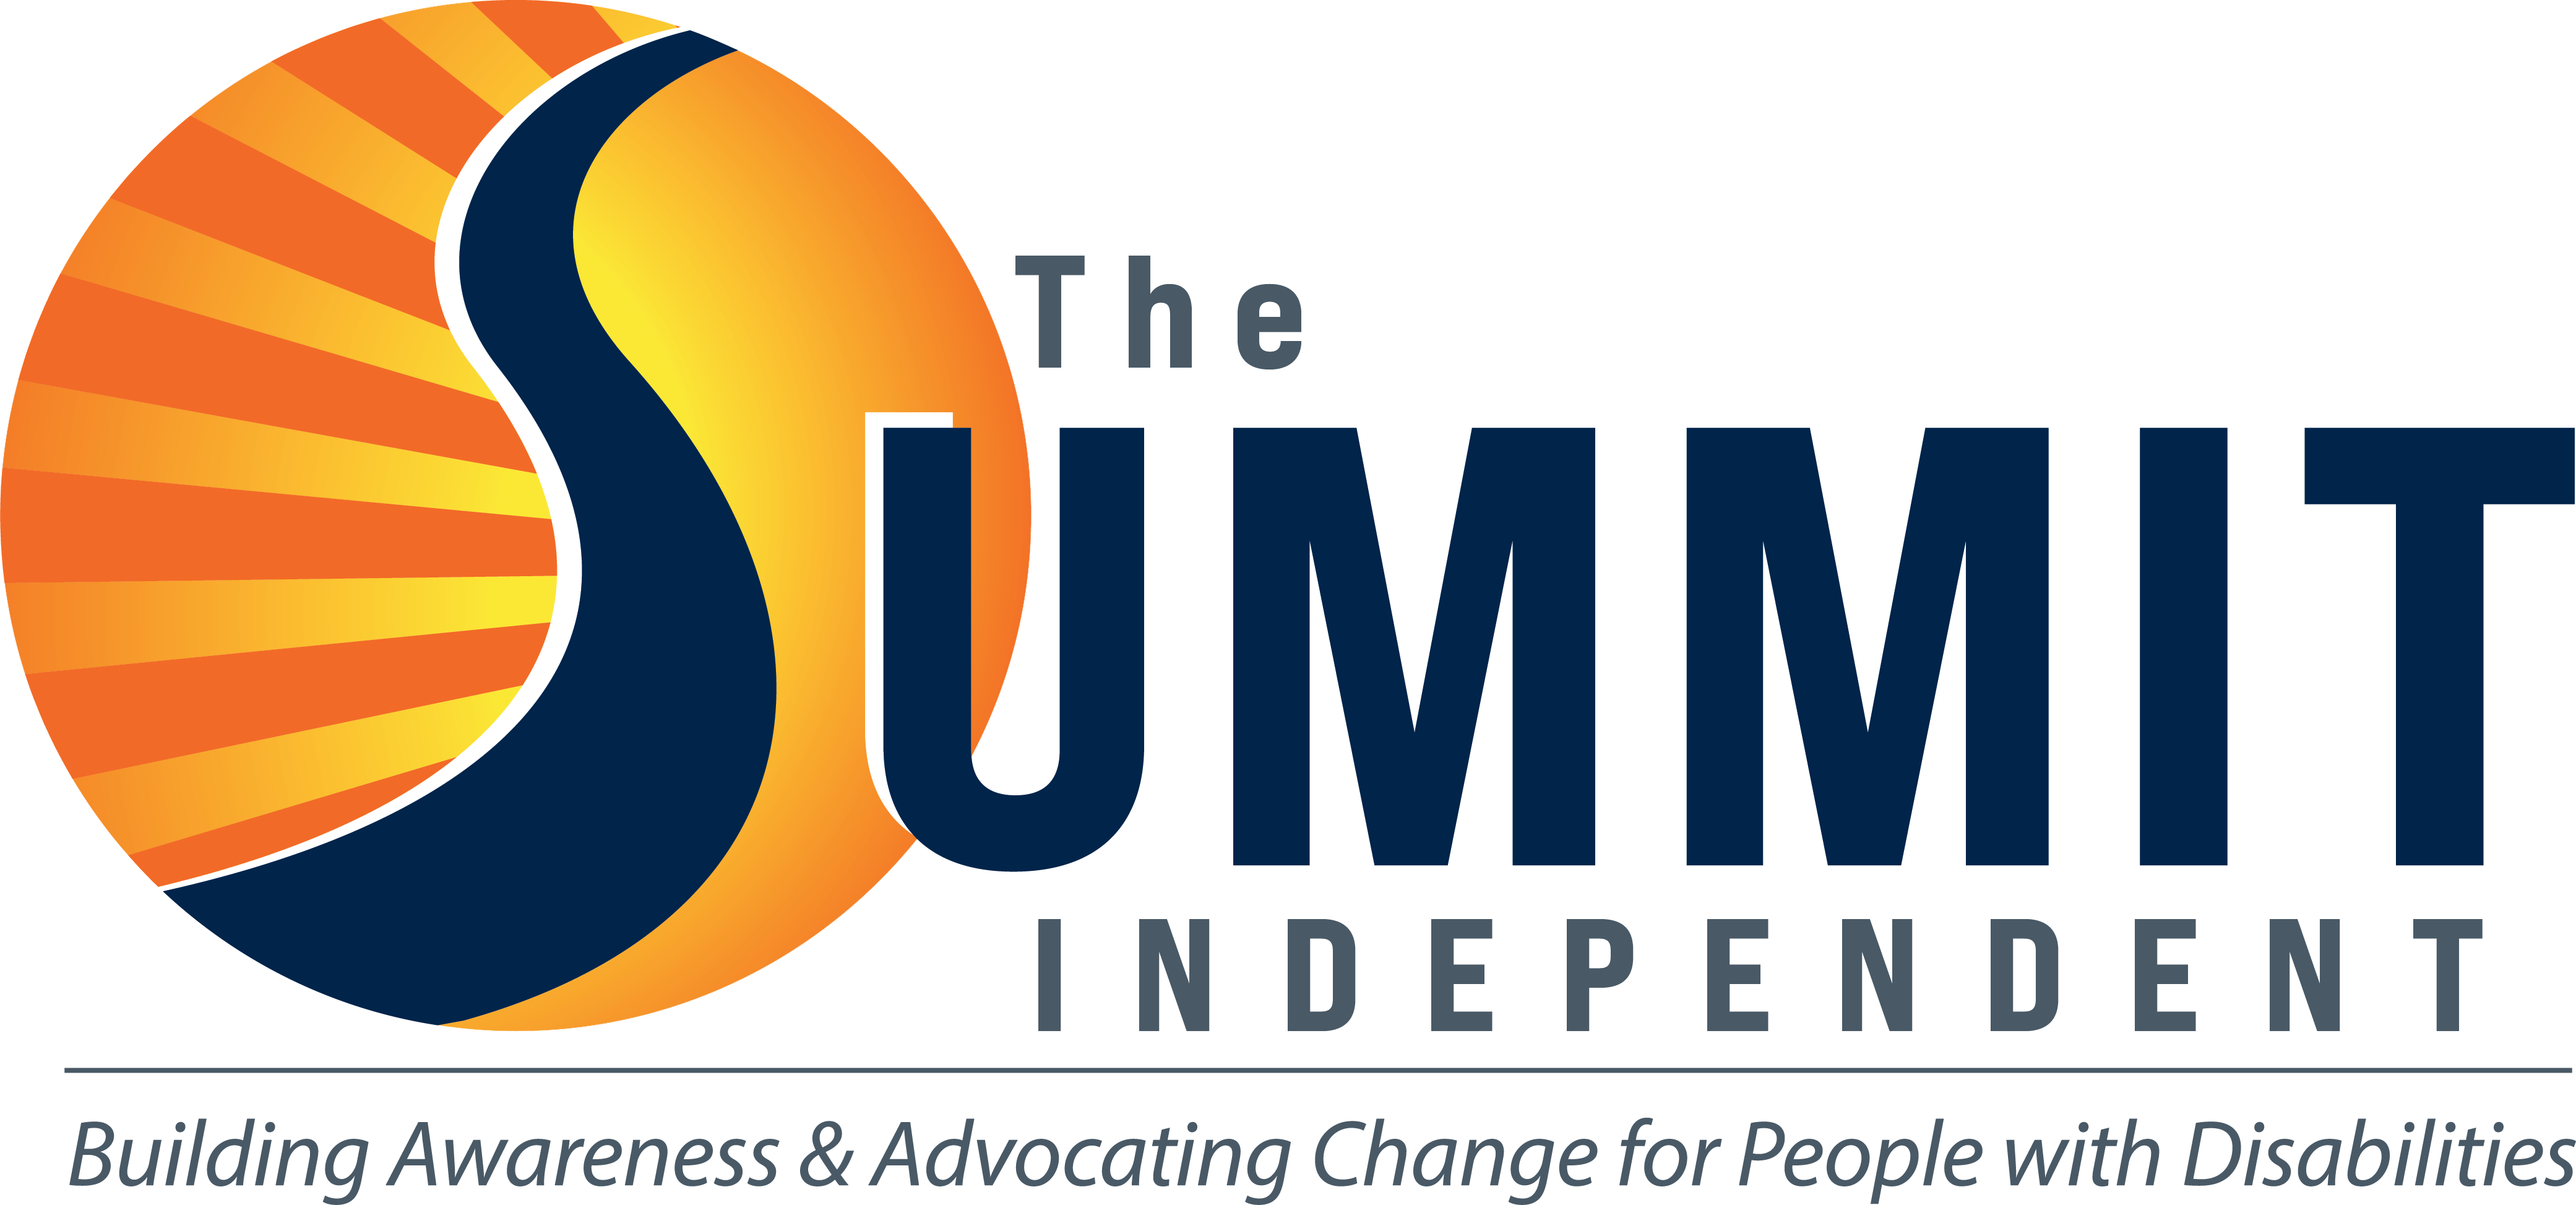 The Summit Independent